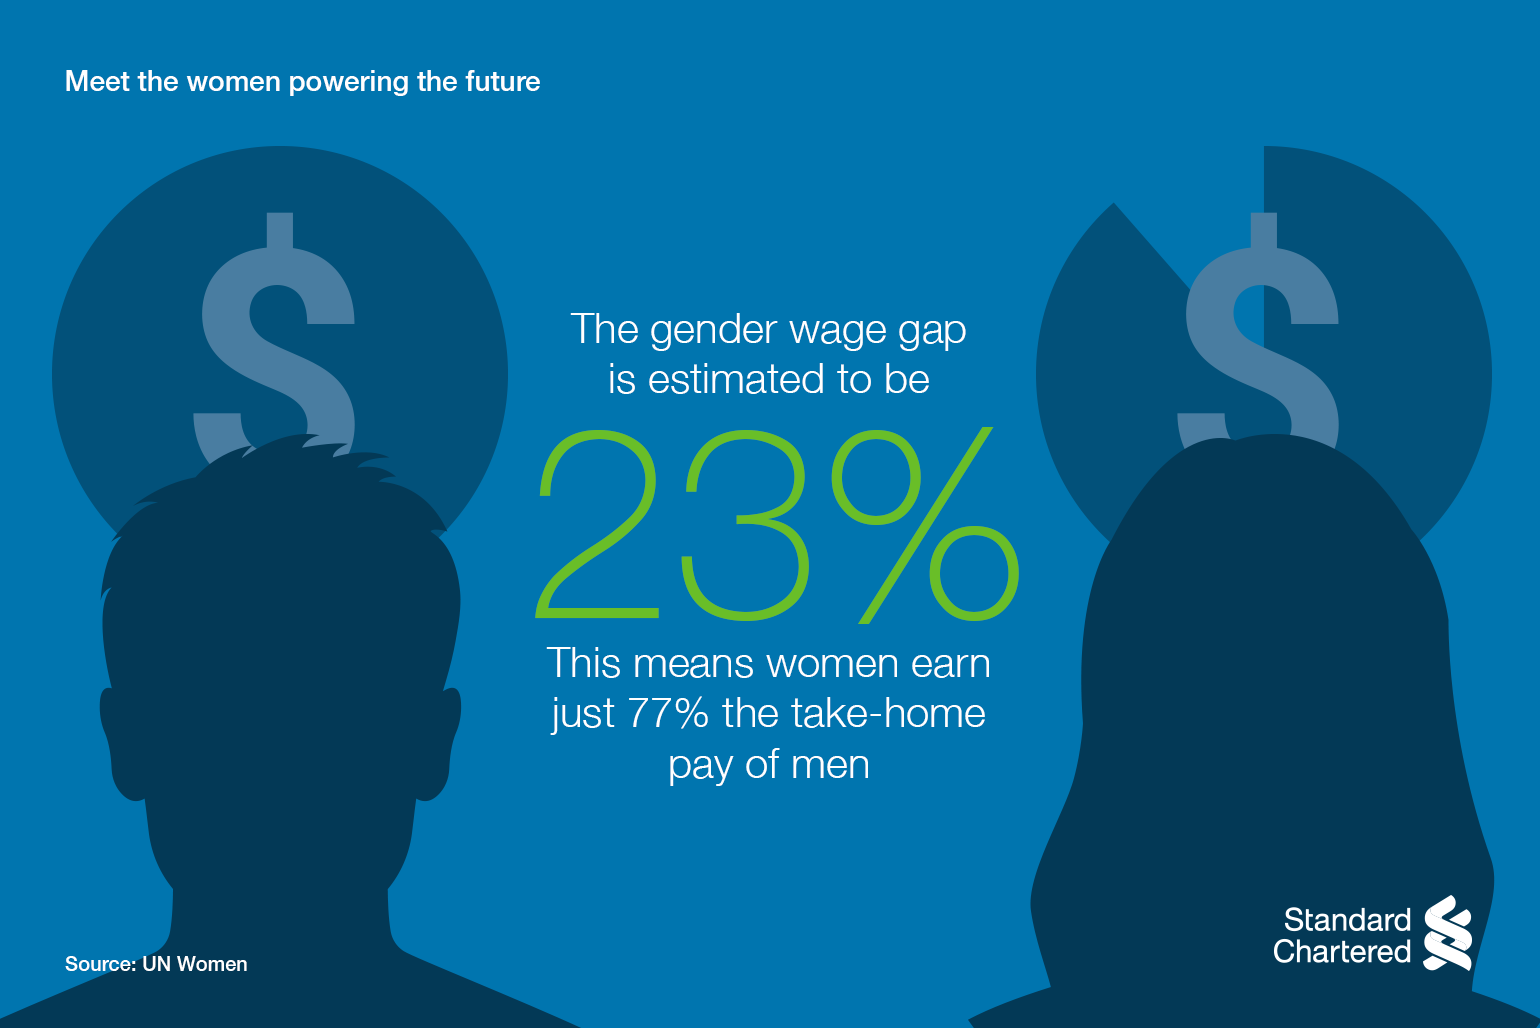 The gender wage gap is estimated to be 23%